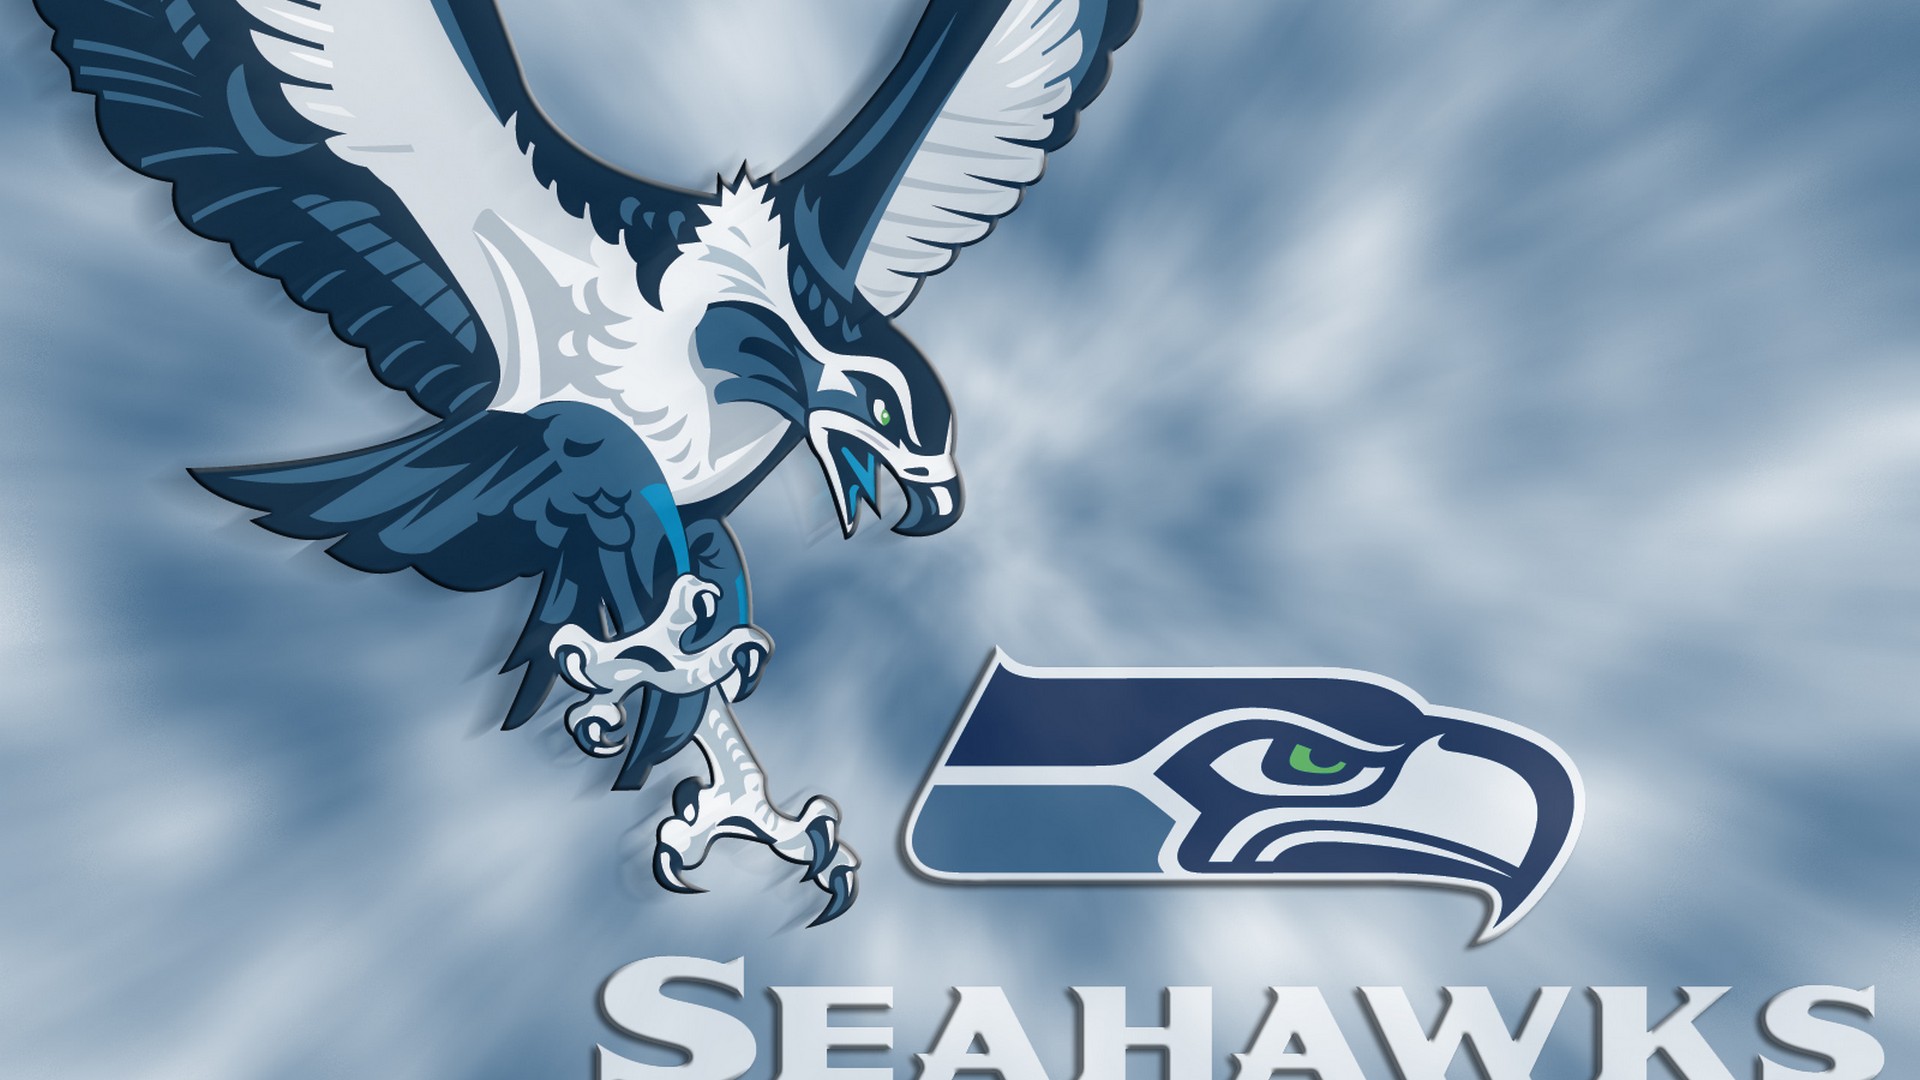 HD Desktop Wallpaper Seattle Seahawks with high-resolution 1920x1080 pixel. You can use this wallpaper for your Mac or Windows Desktop Background, iPhone, Android or Tablet and another Smartphone device